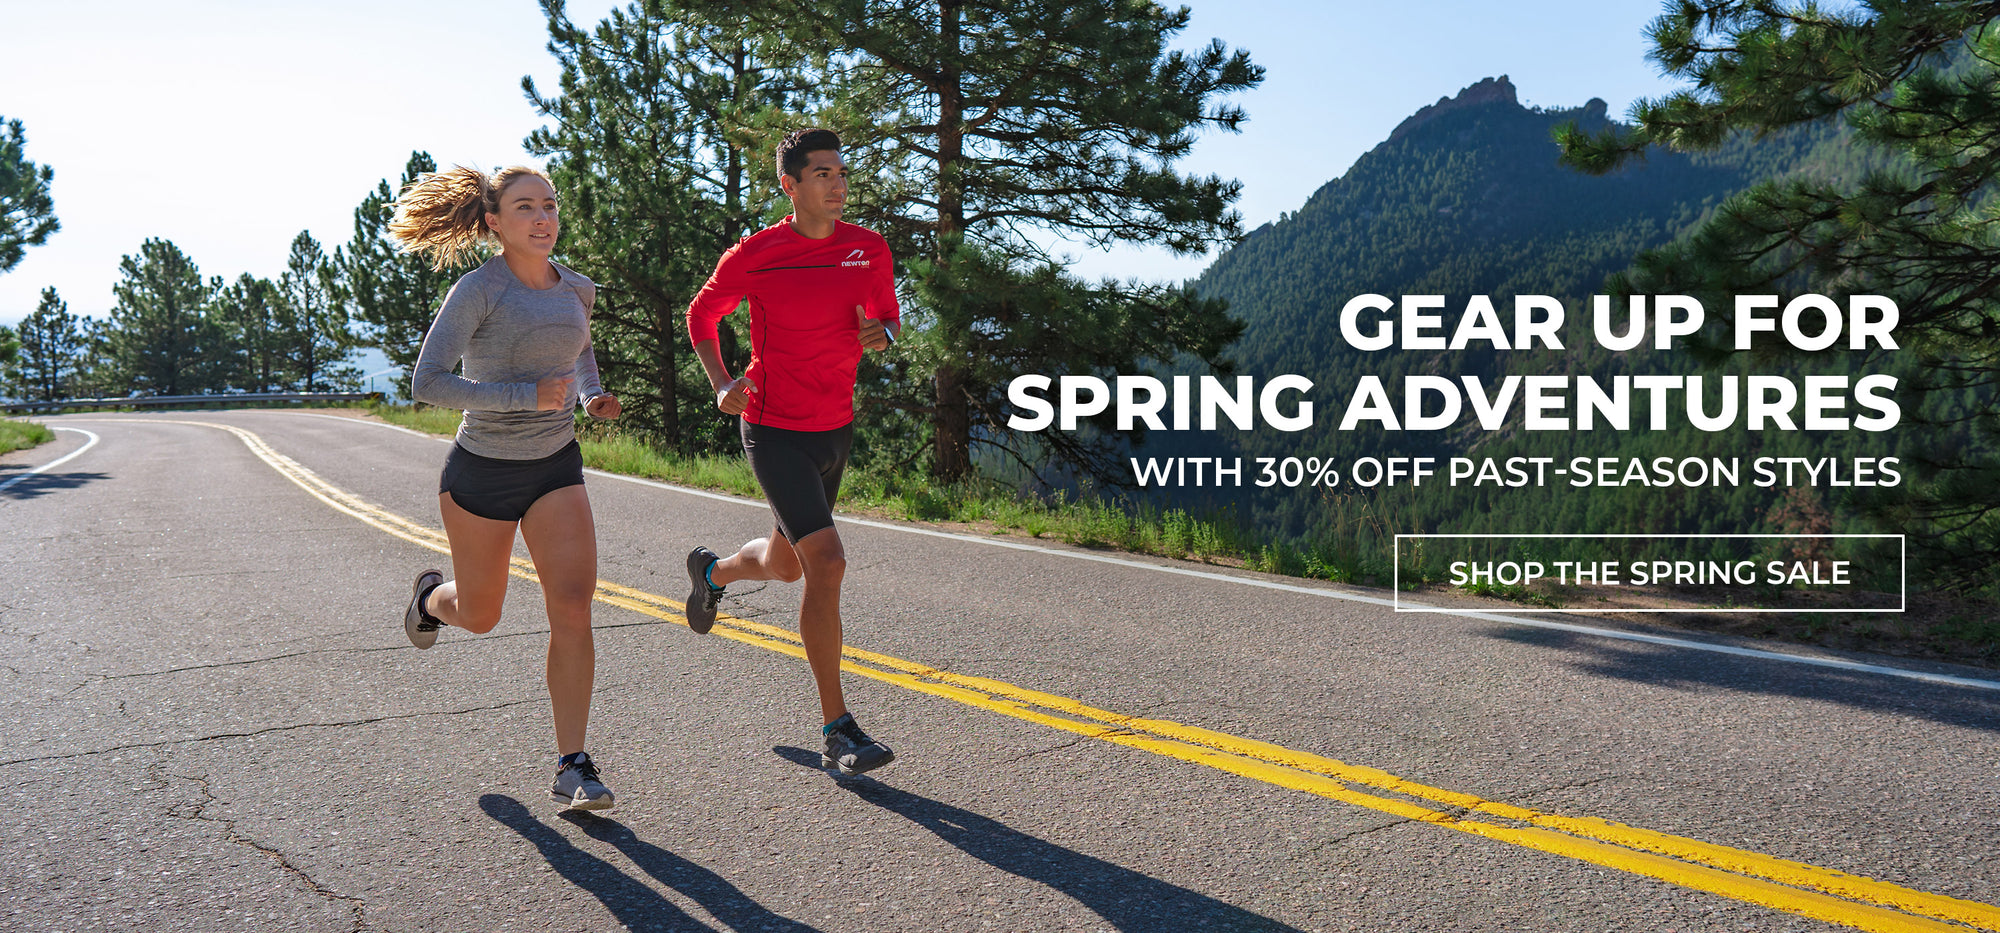 Gear up for spring adventures with 30% off past-season styles. Shop the spring sale.